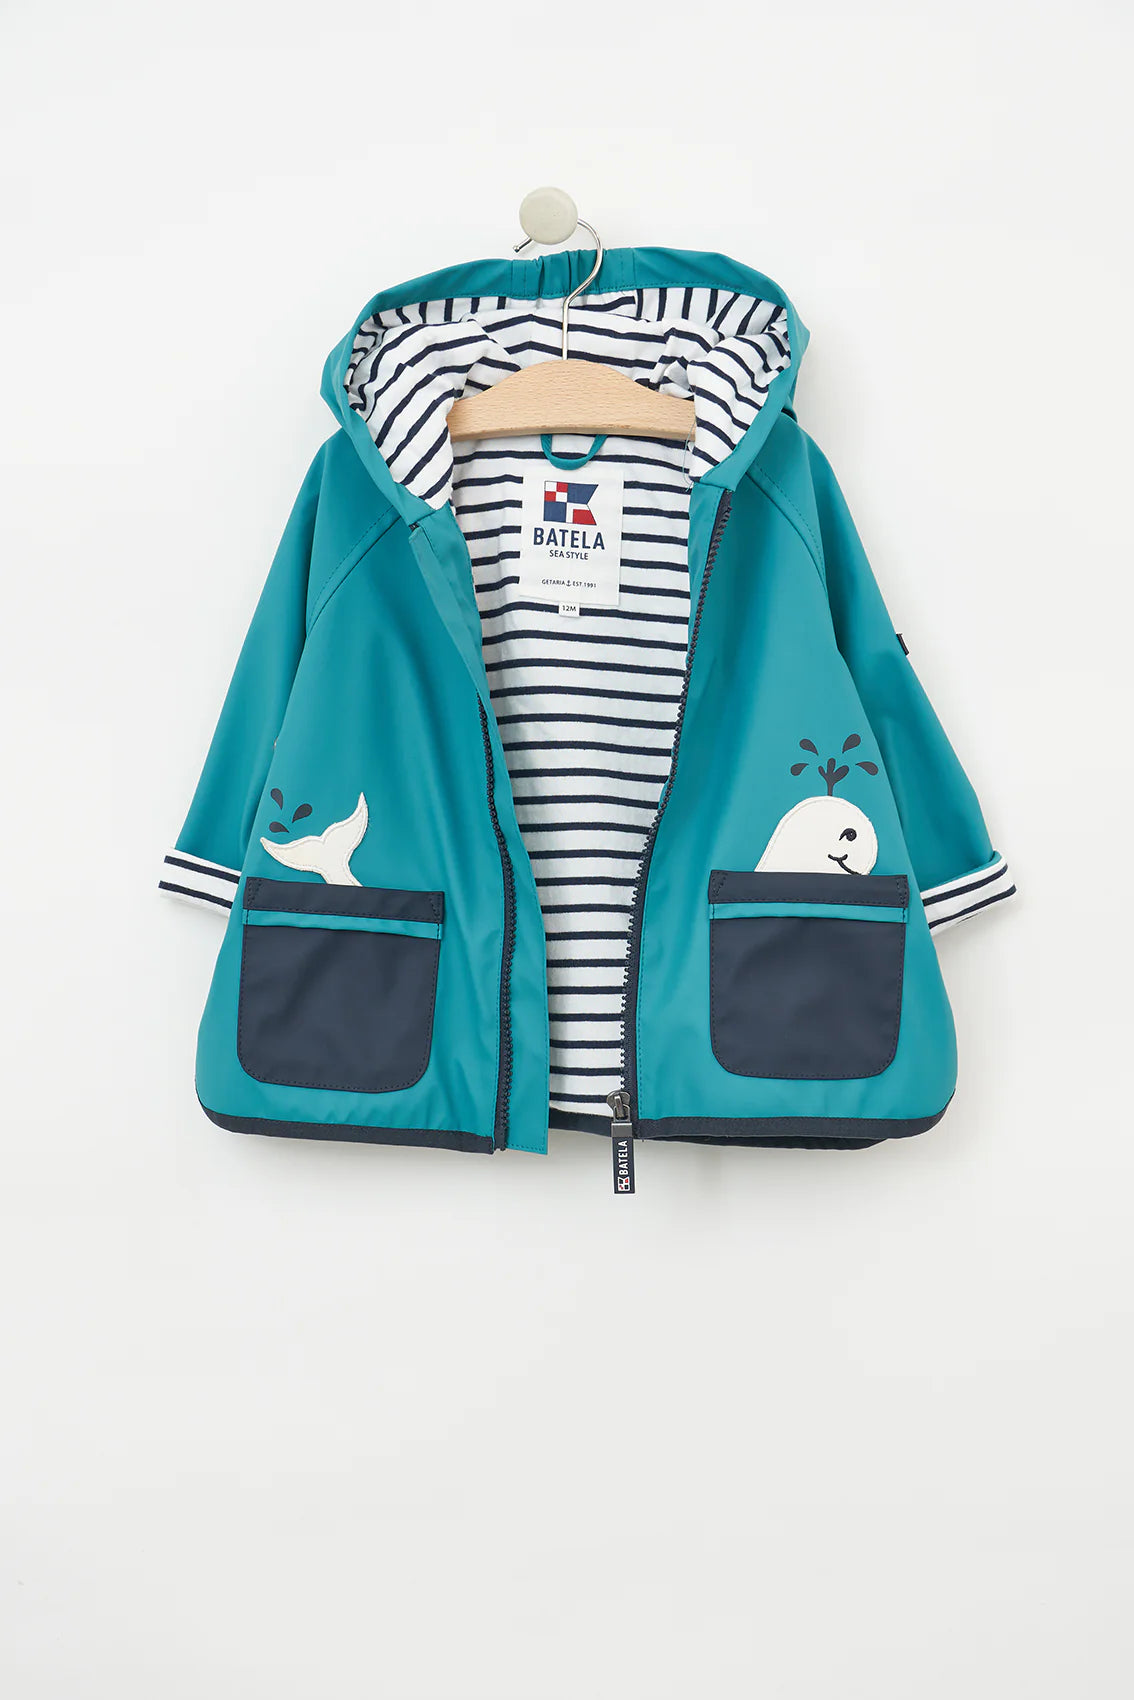 Batela Baby’s Rain Jacket with Whale Pockets and Stripe Cotton Lining